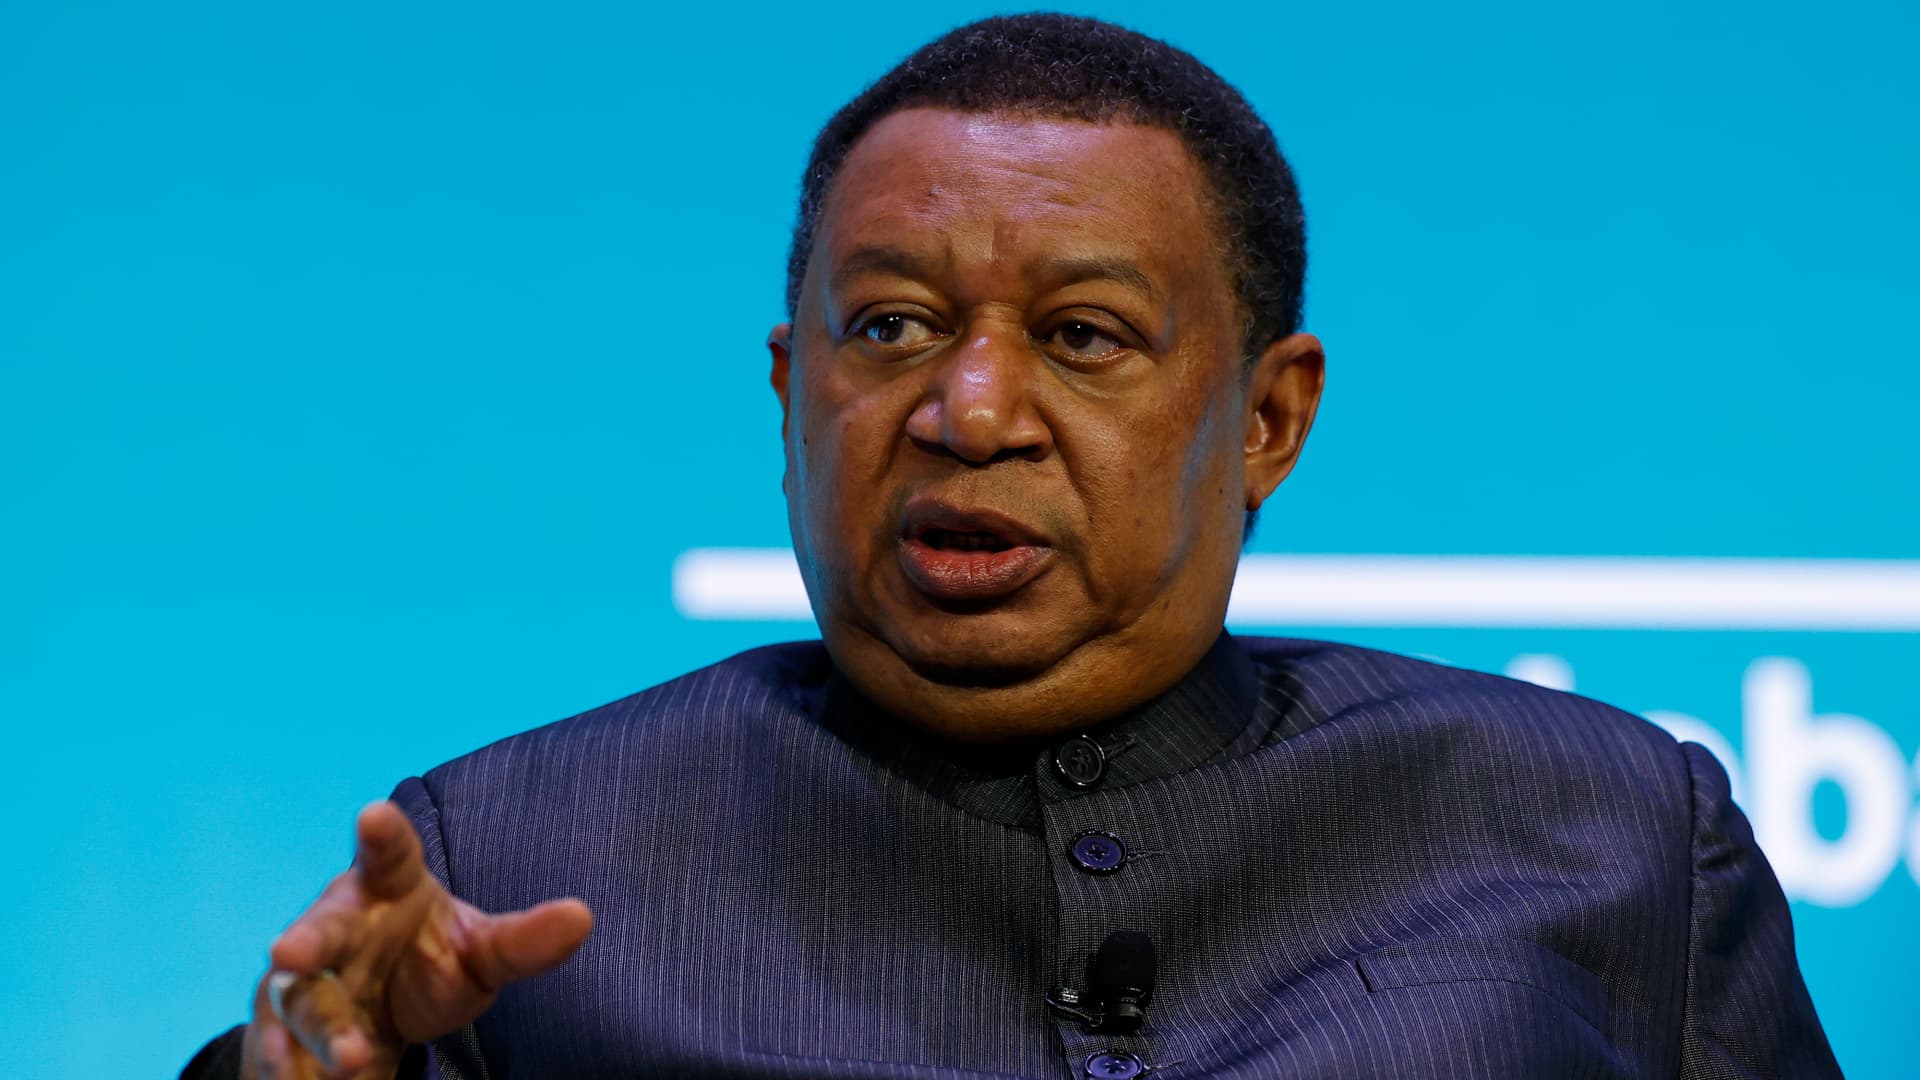 OPEC Secretary General Mohammad Barkindo dies at age 63 - CNBC : Barkindo's unexpected death came as a surprise to members of the oil and gas world, many of whom describe him as a giant in the industry.  | Tranquility 國際社群